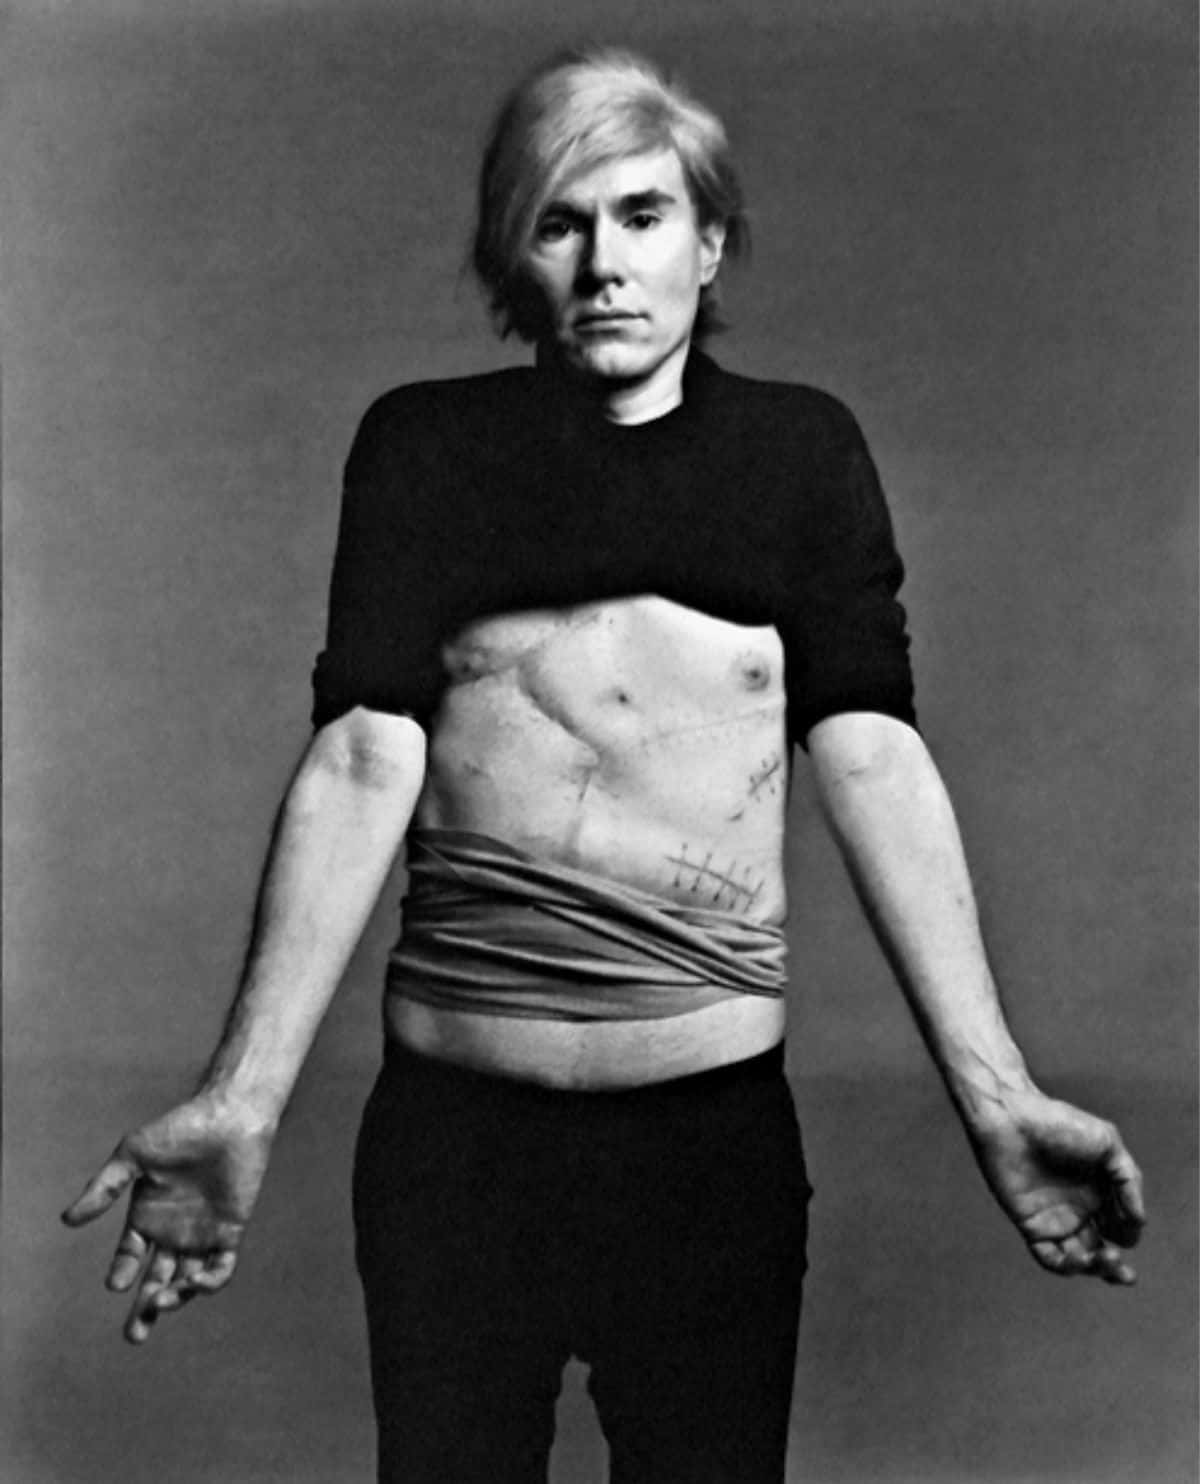 The Iconic Pop Artist Andy Warhol